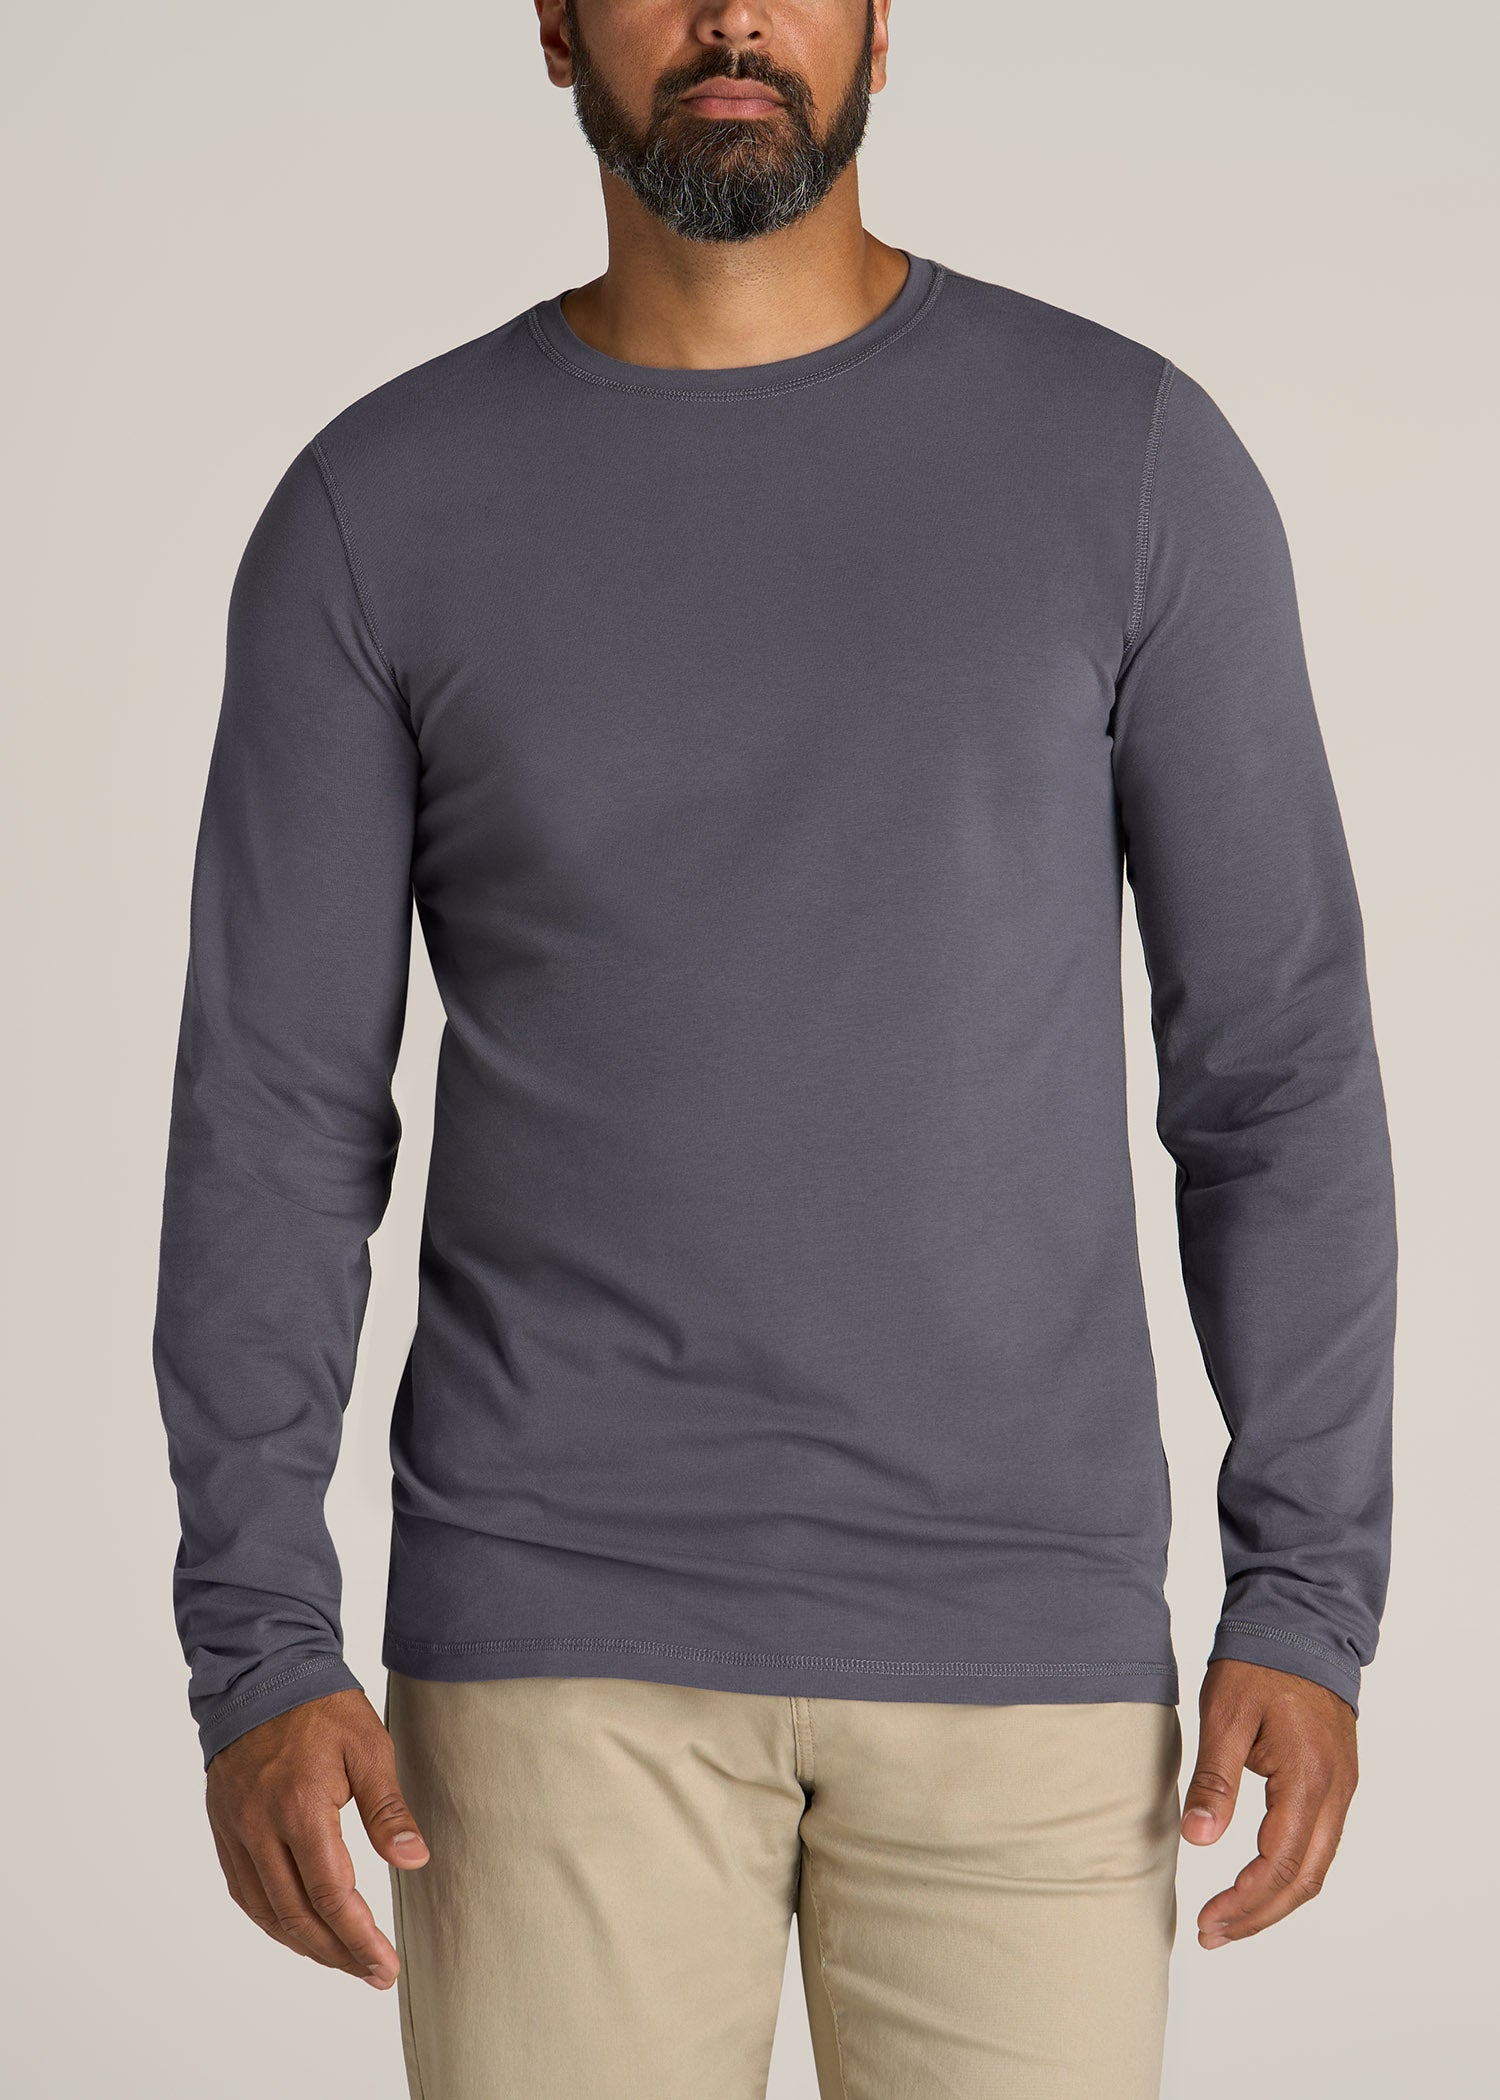 Long-Sleeved Cotton Shirt - Ready-to-Wear